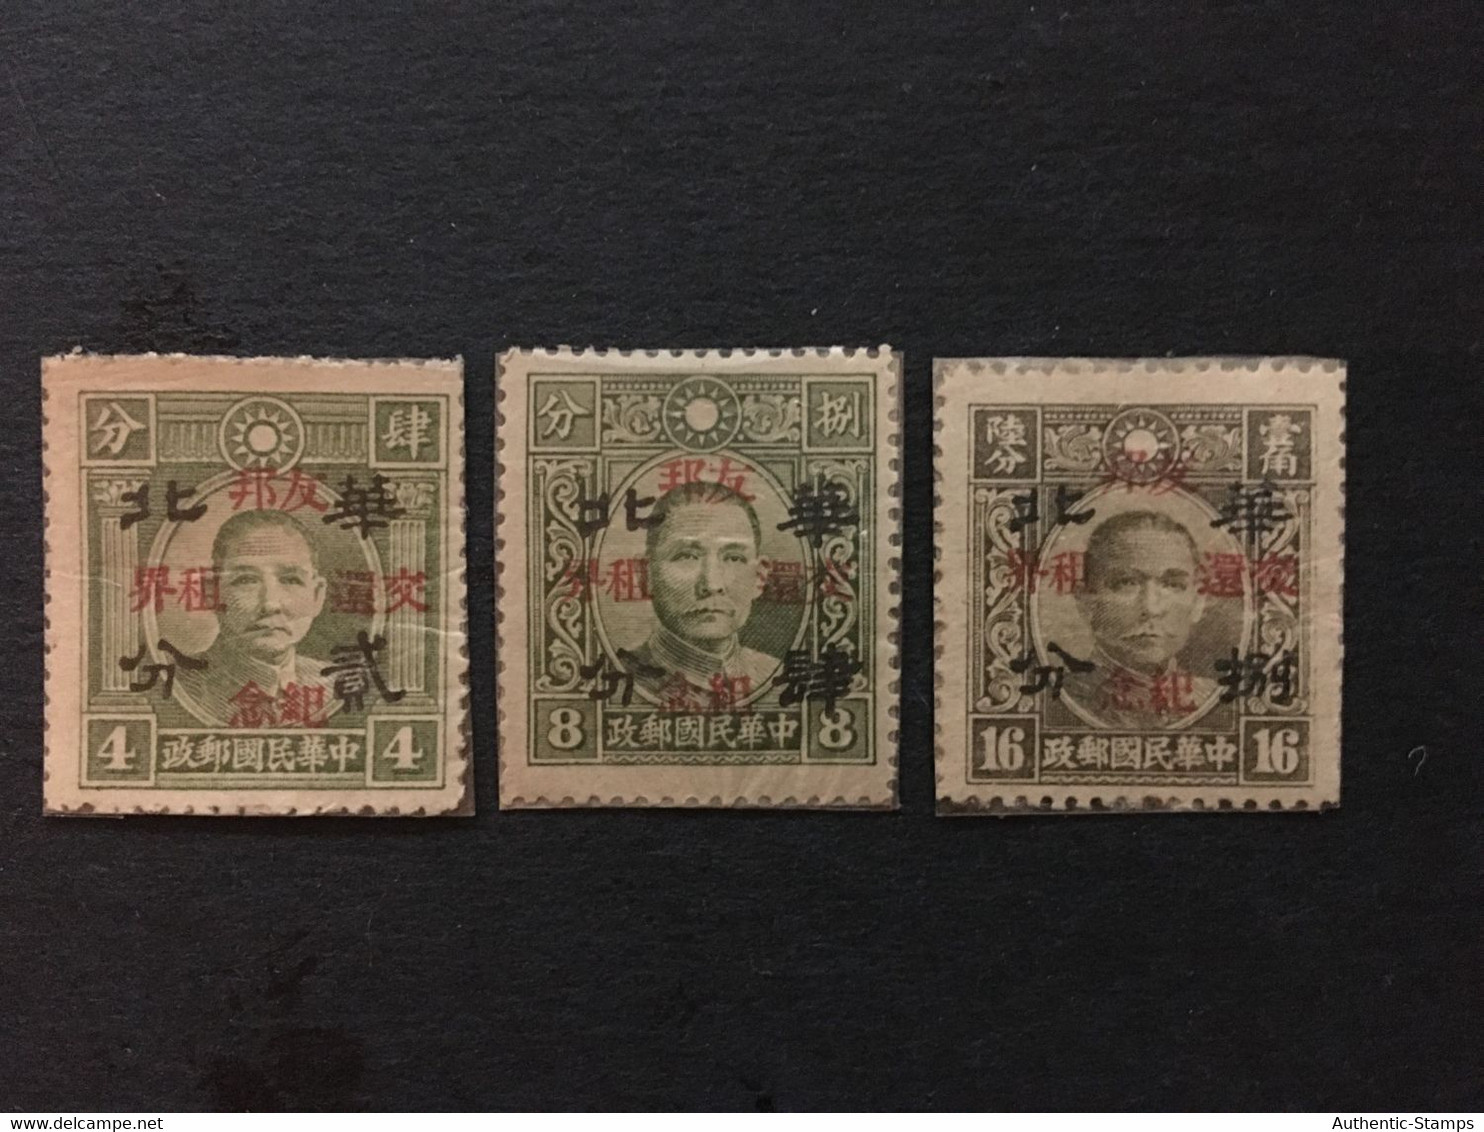 1943 CHINA  STAMP Set, Stamps Overprinted With “Return Of Foreign Concessions To China, MLH, CINA, CHINE,  LIST 1068 - 1941-45 Cina Del Nord